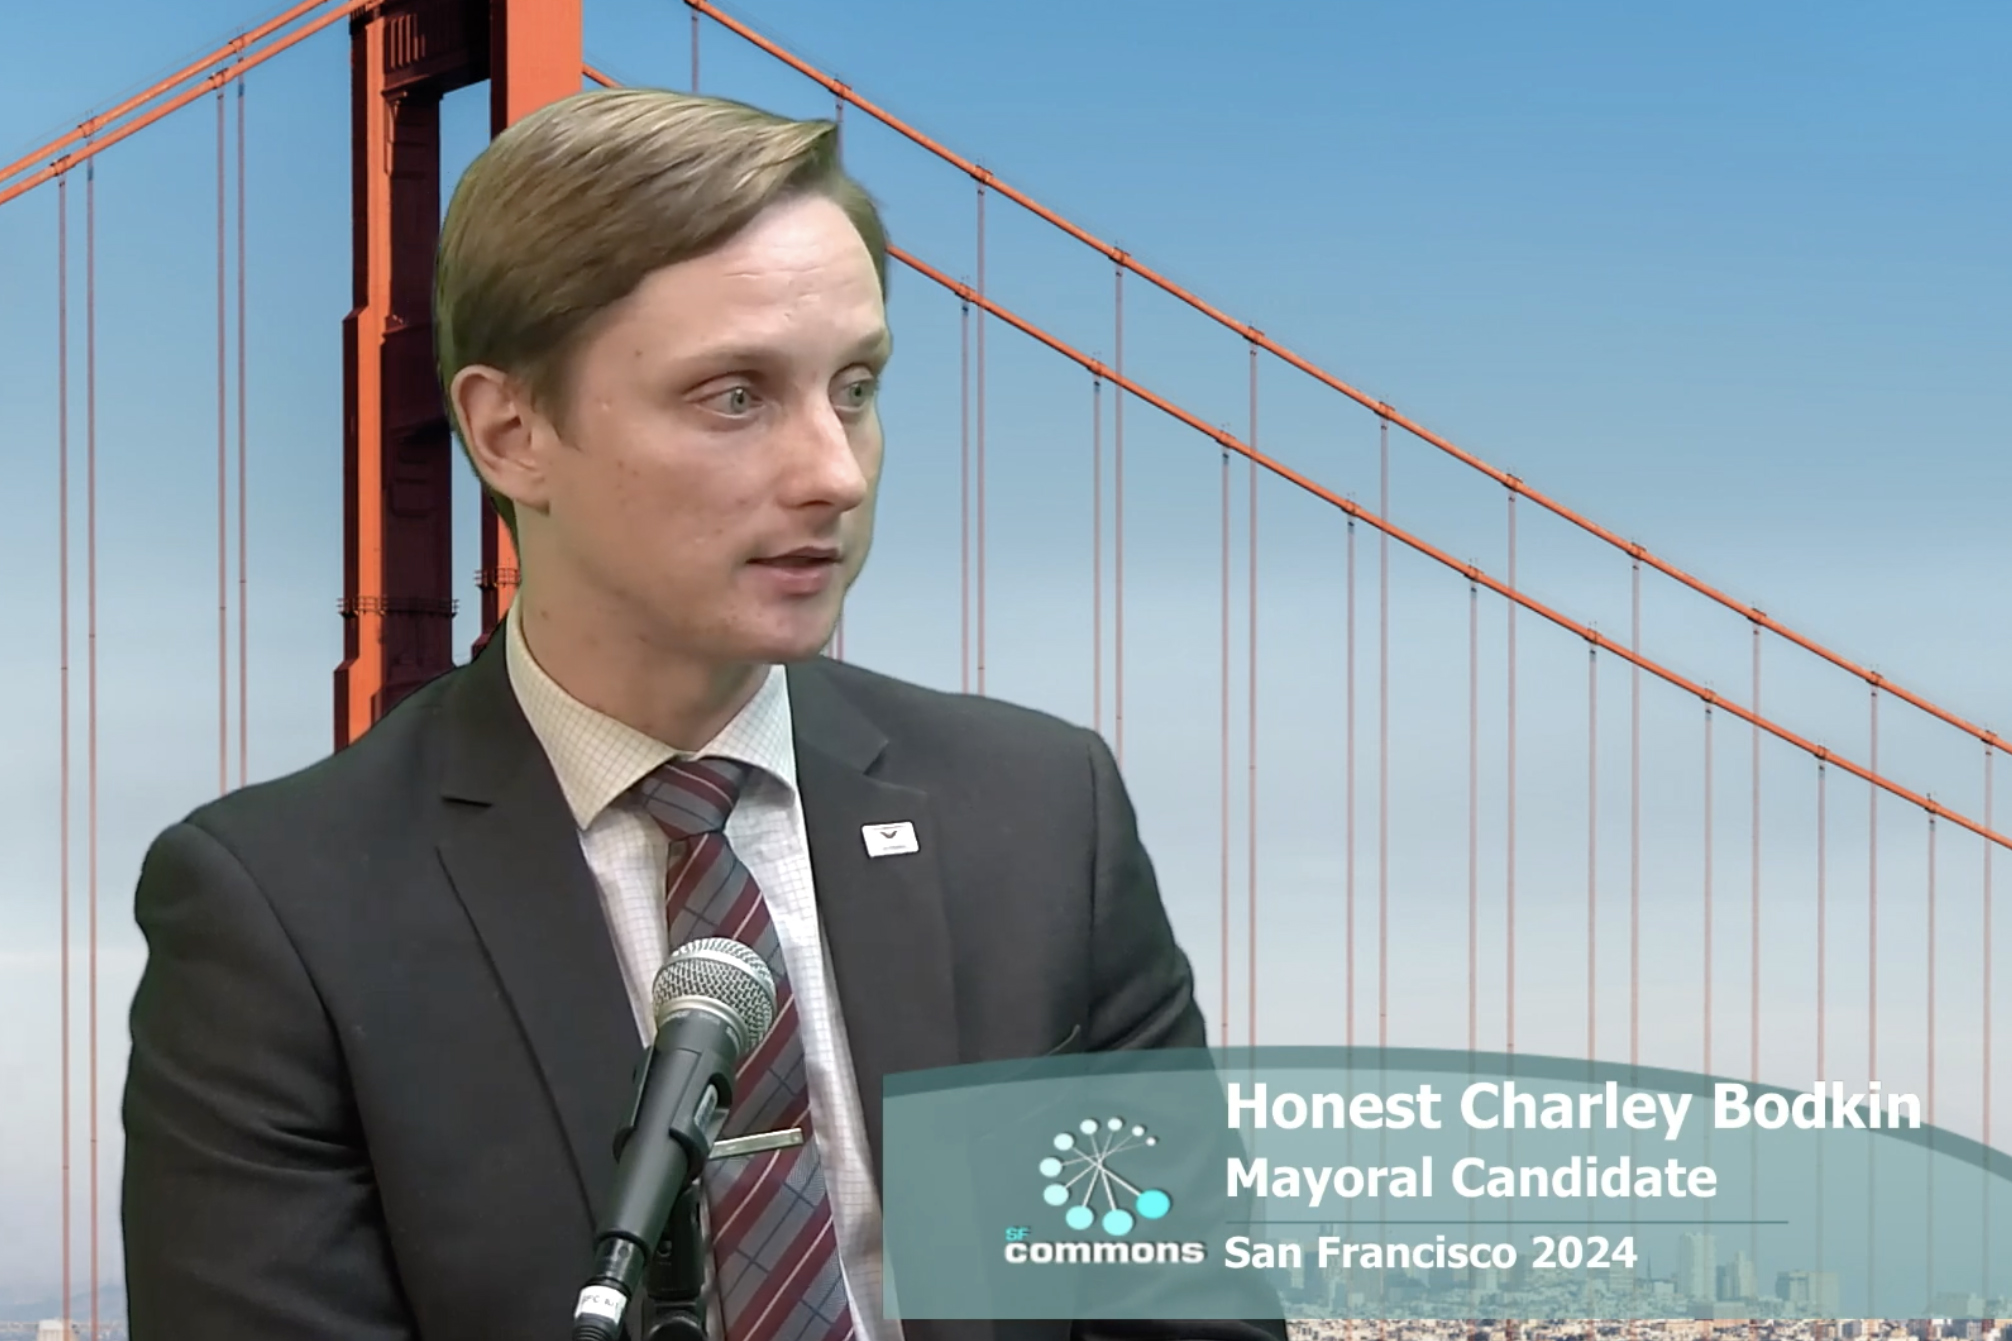 A man stands before a mic; &quot;Honest Charley Bodkin, Mayoral Candidate&quot; is captioned against a Golden Gate Bridge backdrop.